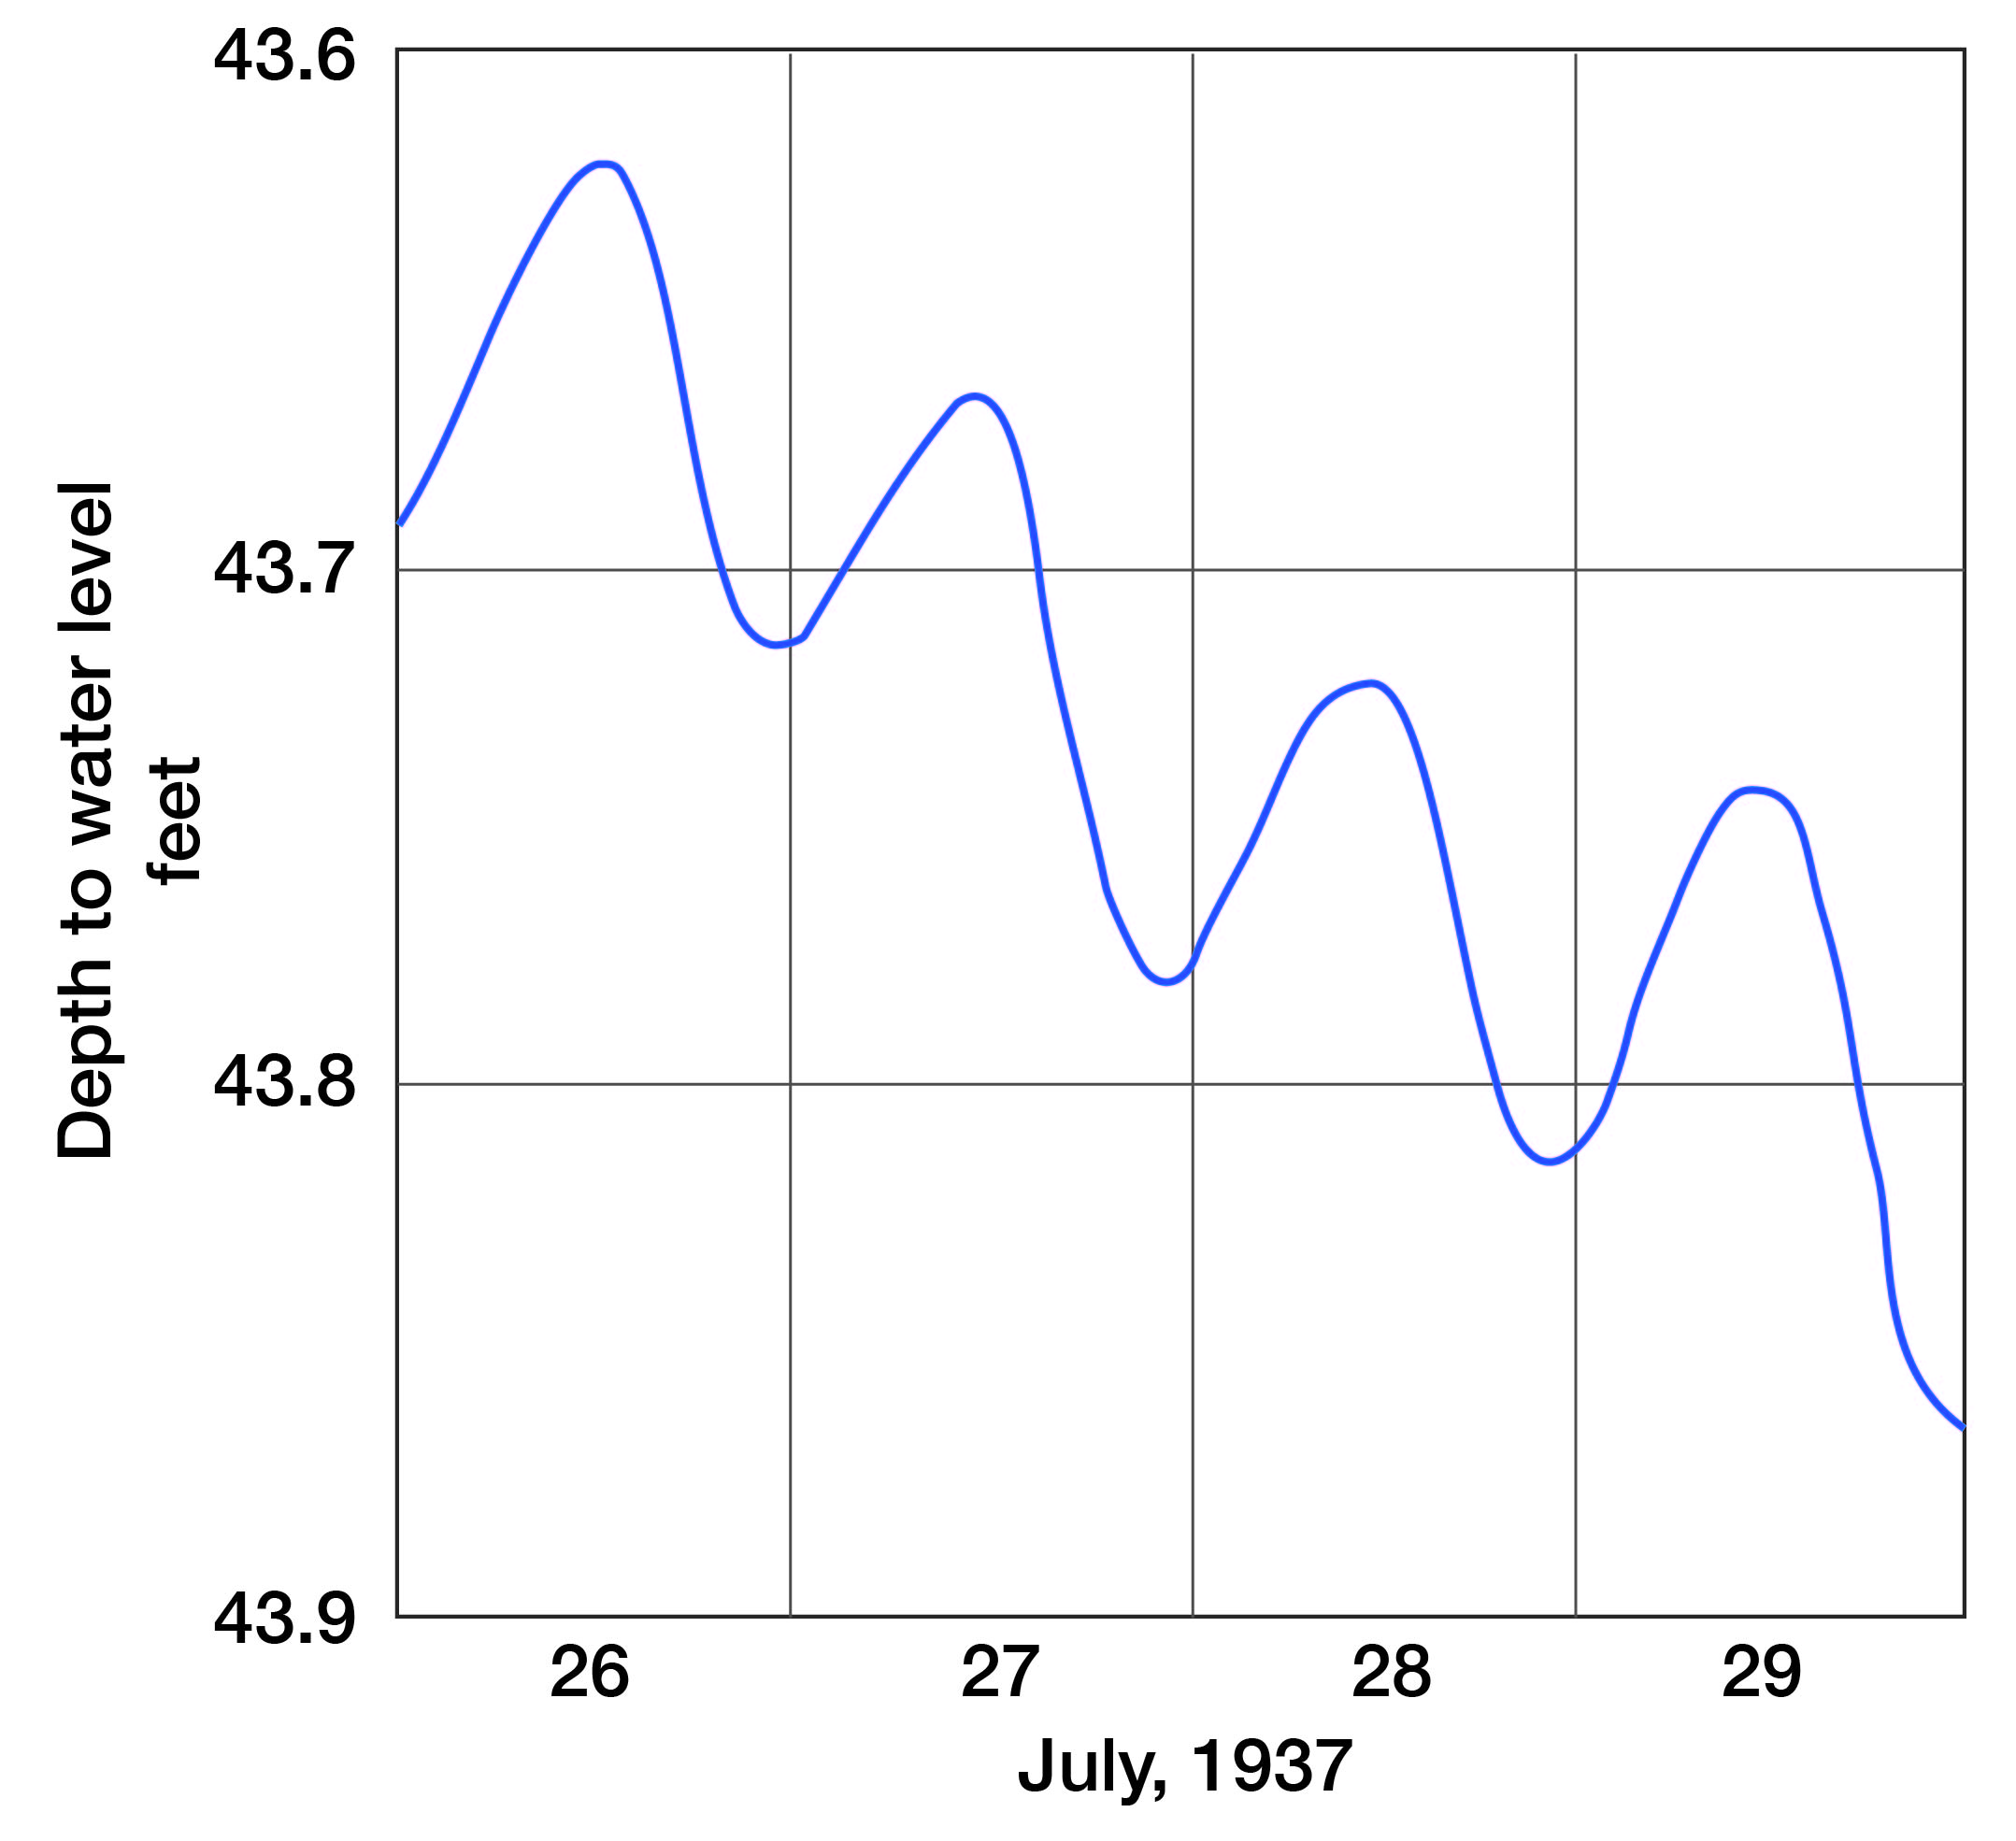 Daily changes in water level are shown.